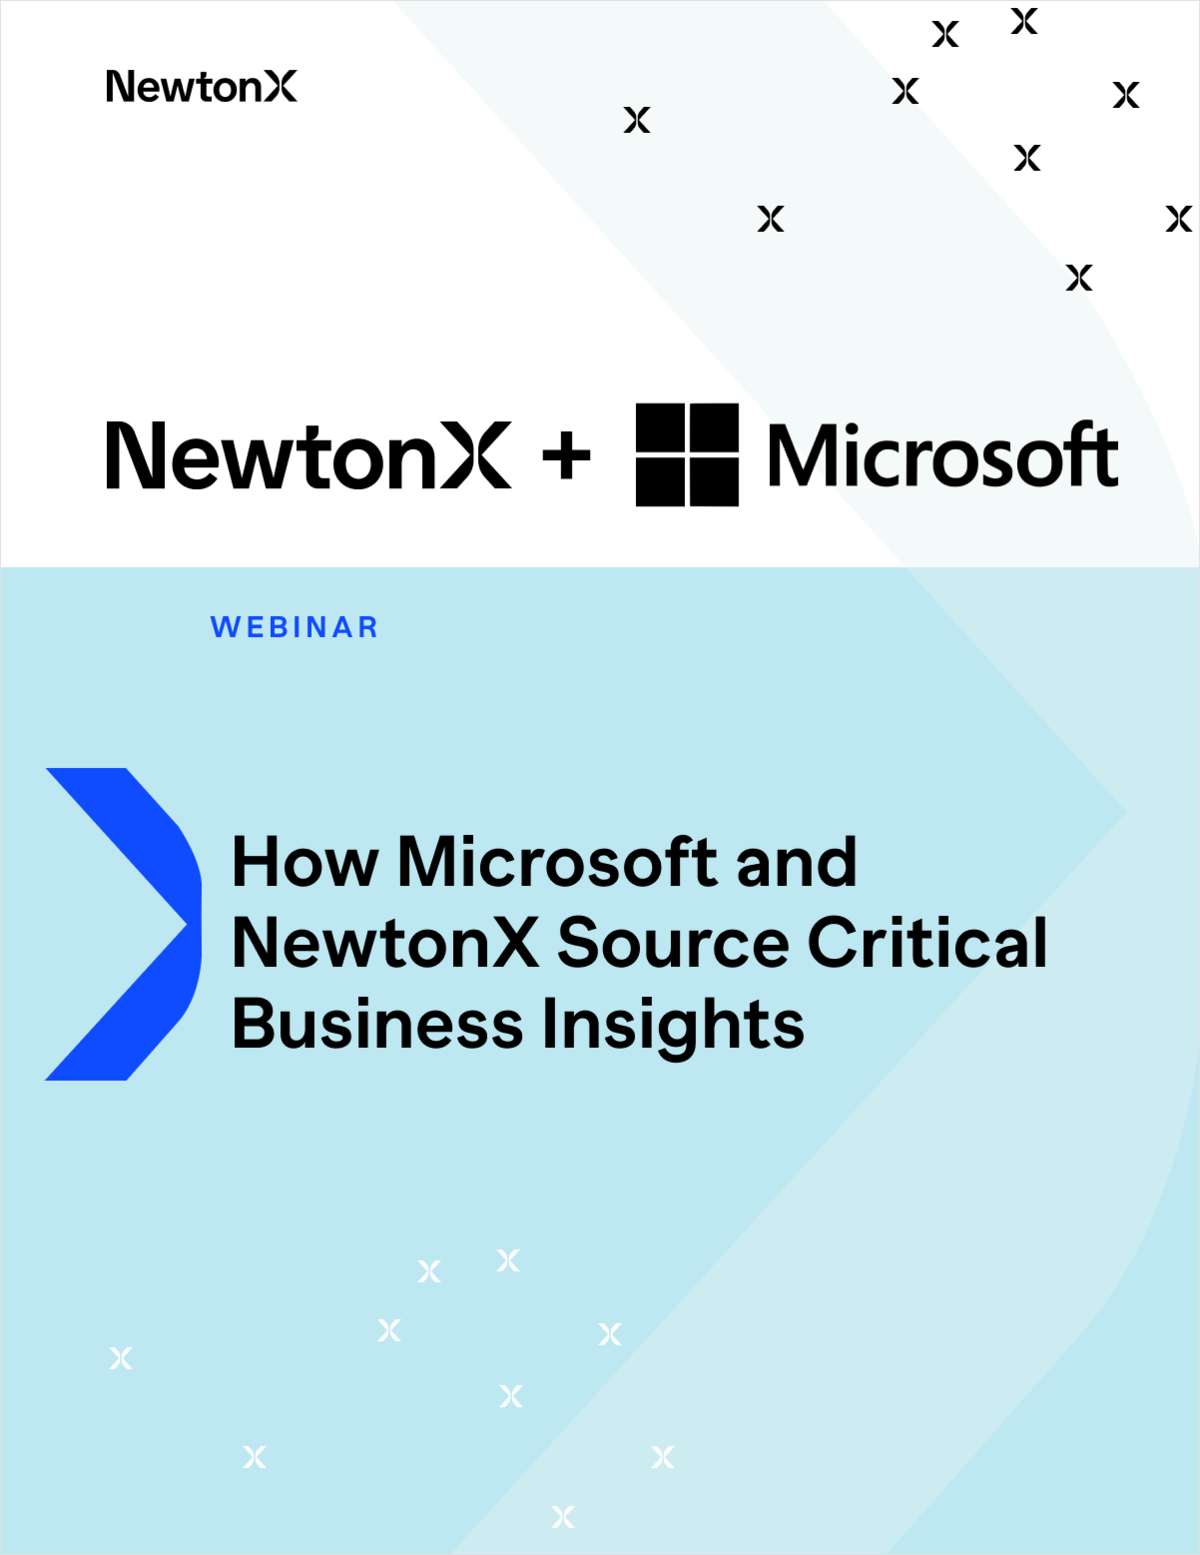 How Microsoft and NewtonX Source Critical Business Insights